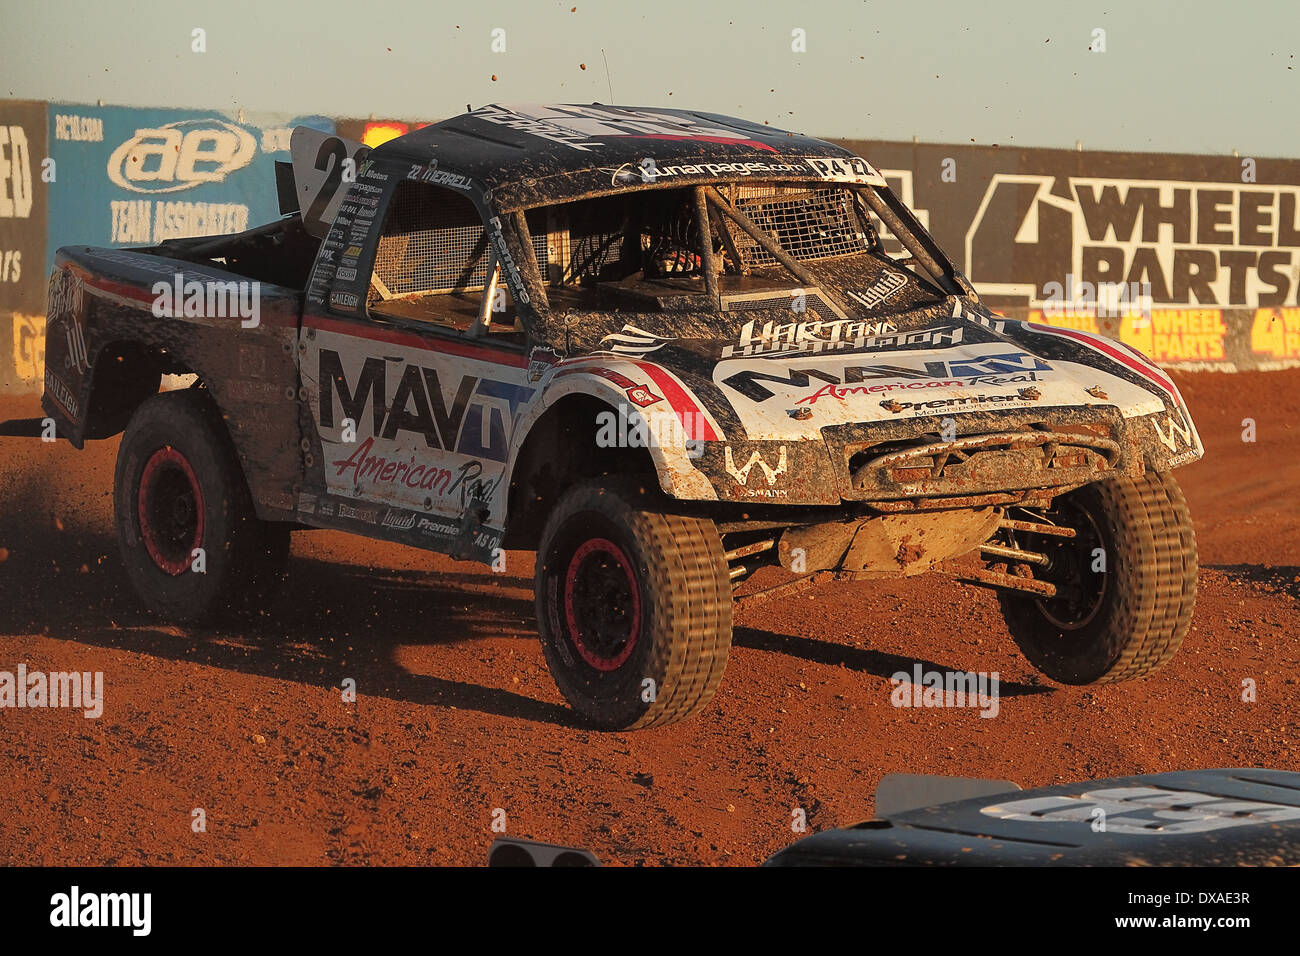 CHANDLER, AZ - OCT 28: Josh Merrell (22) at speed in the Lucas Oil Off Road Series racing Challenge Cup on October 28, 2012. Stock Photo